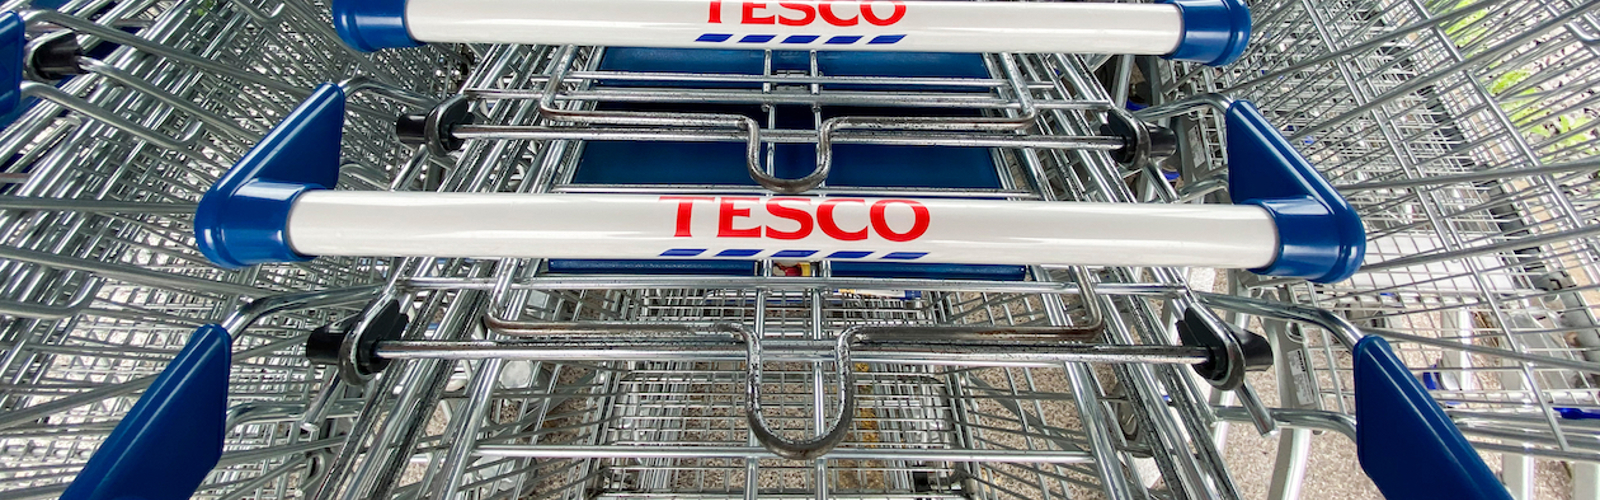 A stack of supermarket trollies with the Tesco logo on their handles